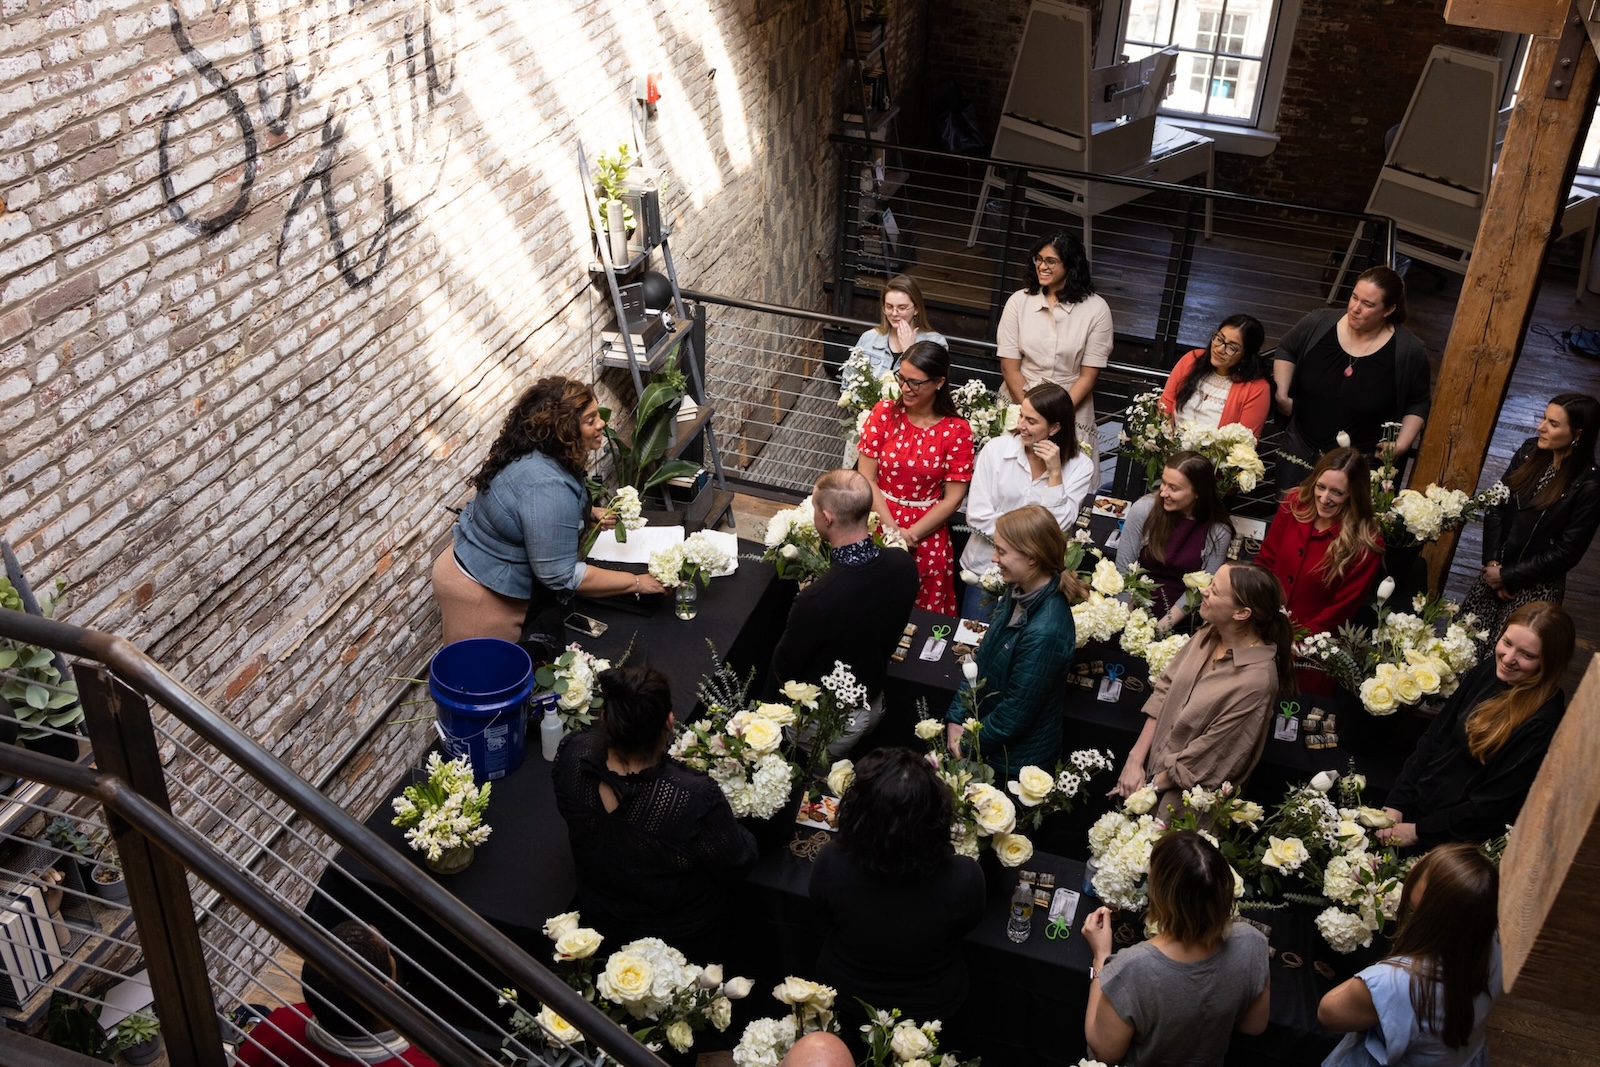 A group of people are gathered in a brick-walled room with large windows. They are attending a flower arranging workshop led by a person at the front, surrounded by white and yellow flowers. They are all focused on the demonstration, with flowers spread out on the tables.